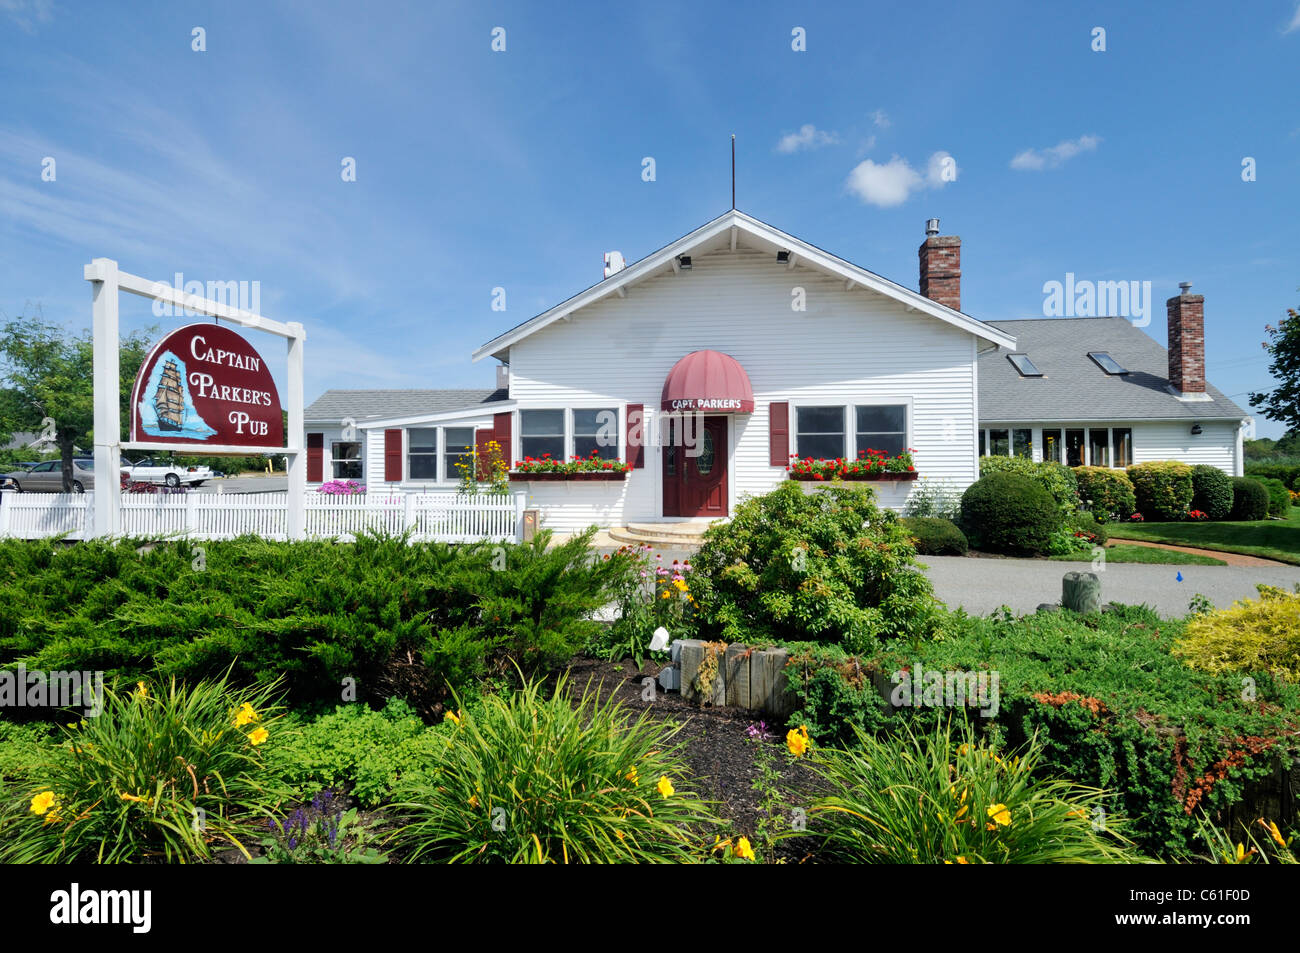 Exterior of Captain Parkers Pub restaurant on route 28 in Yarmouth, Cape Cod, USA well known for clam chowder Stock Photo